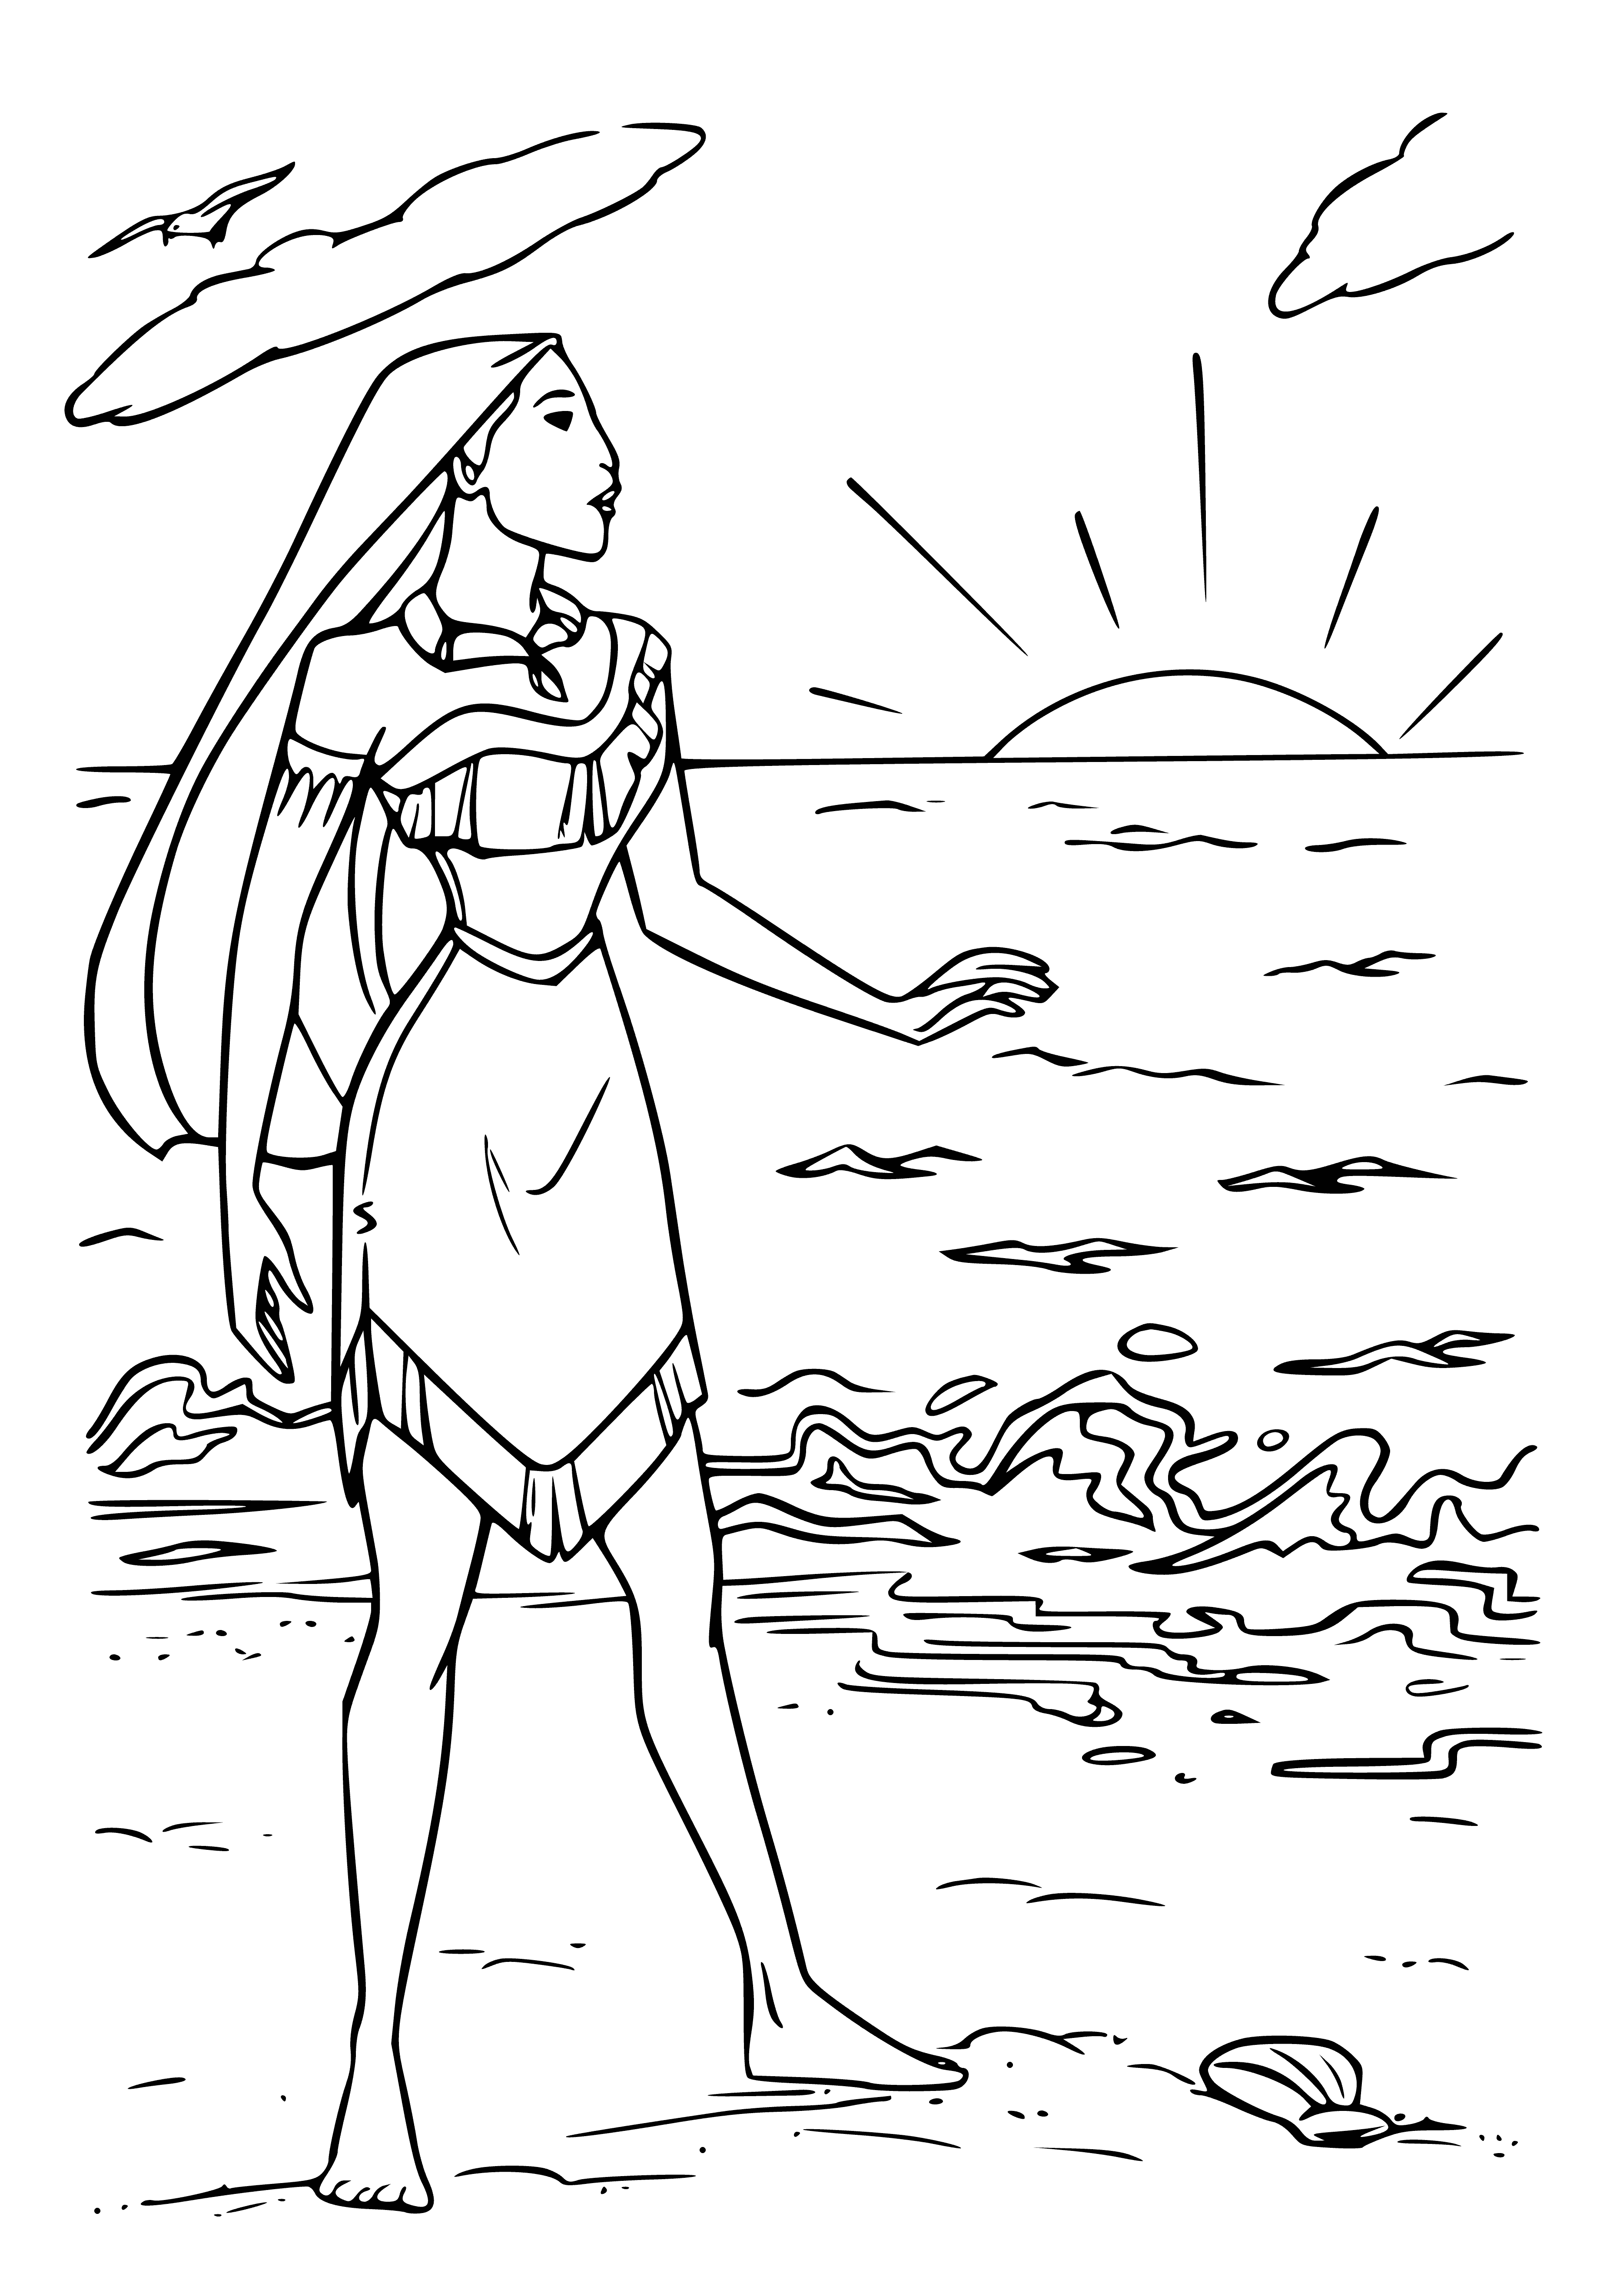 coloring page: Princess Pocahontas poses gracefully in a green field, wearing a brown dress, her hair cascading & holding a staff with a feather pendant. She looks off into the distance.